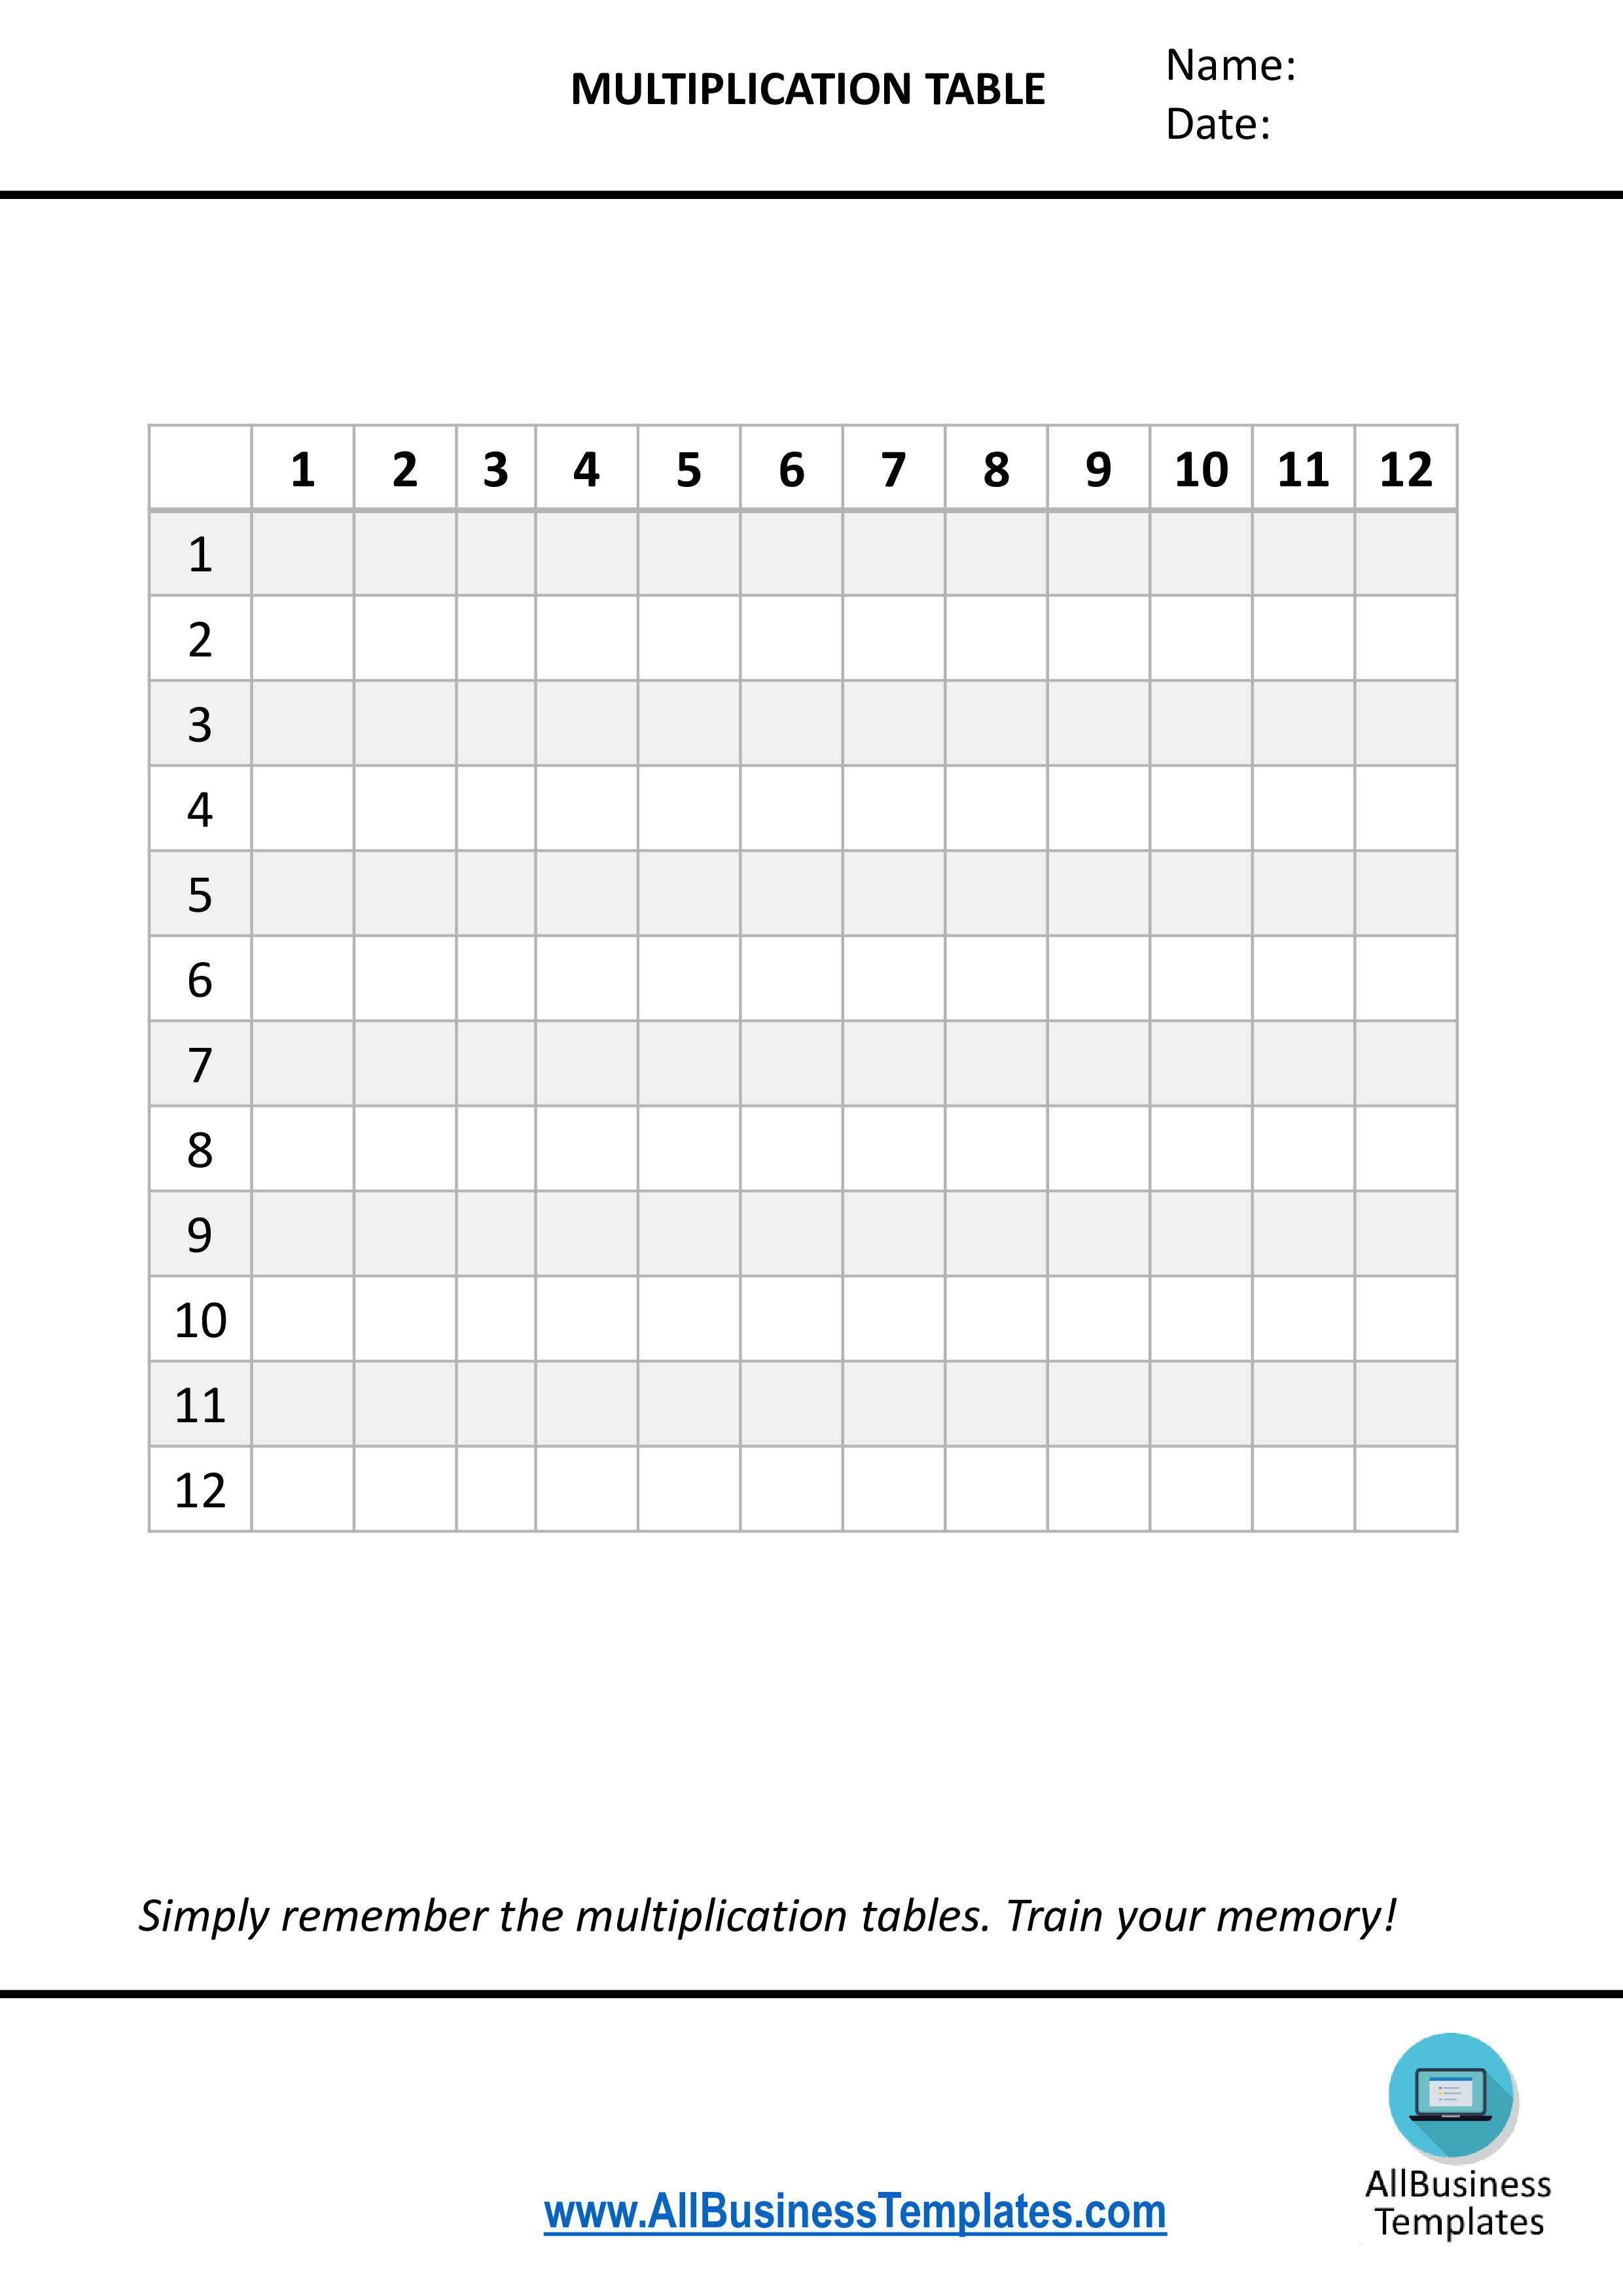 multiplication tables template